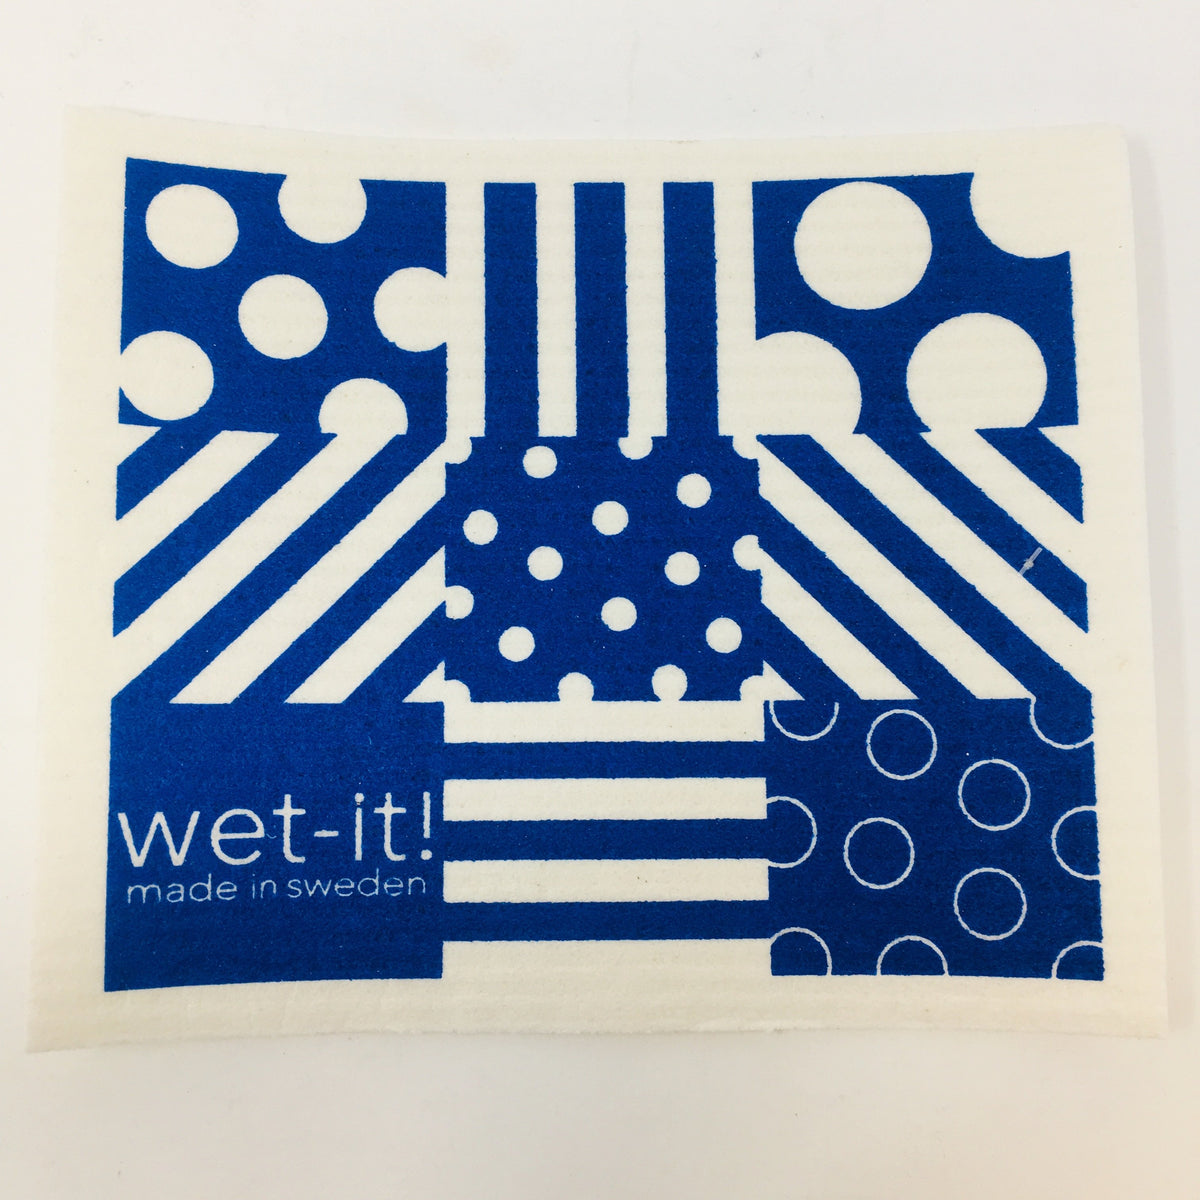 ivory colored rectangle shaped scrubbing pad with a blue patchwork pattern of stripes and dots in blue screen printed on it